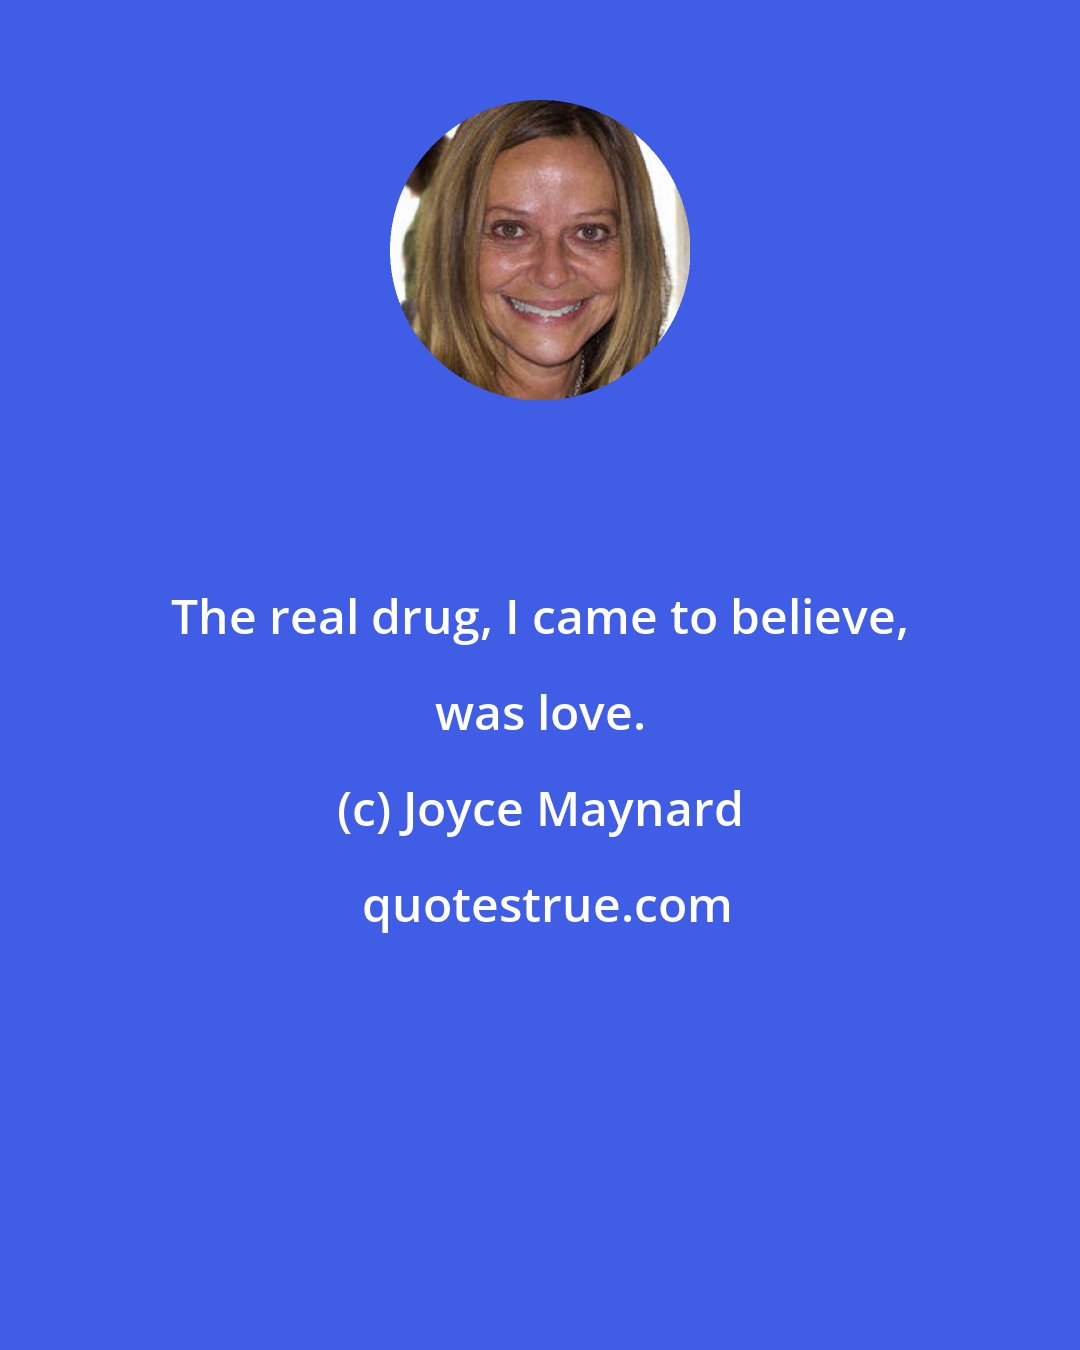 Joyce Maynard: The real drug, I came to believe, was love.